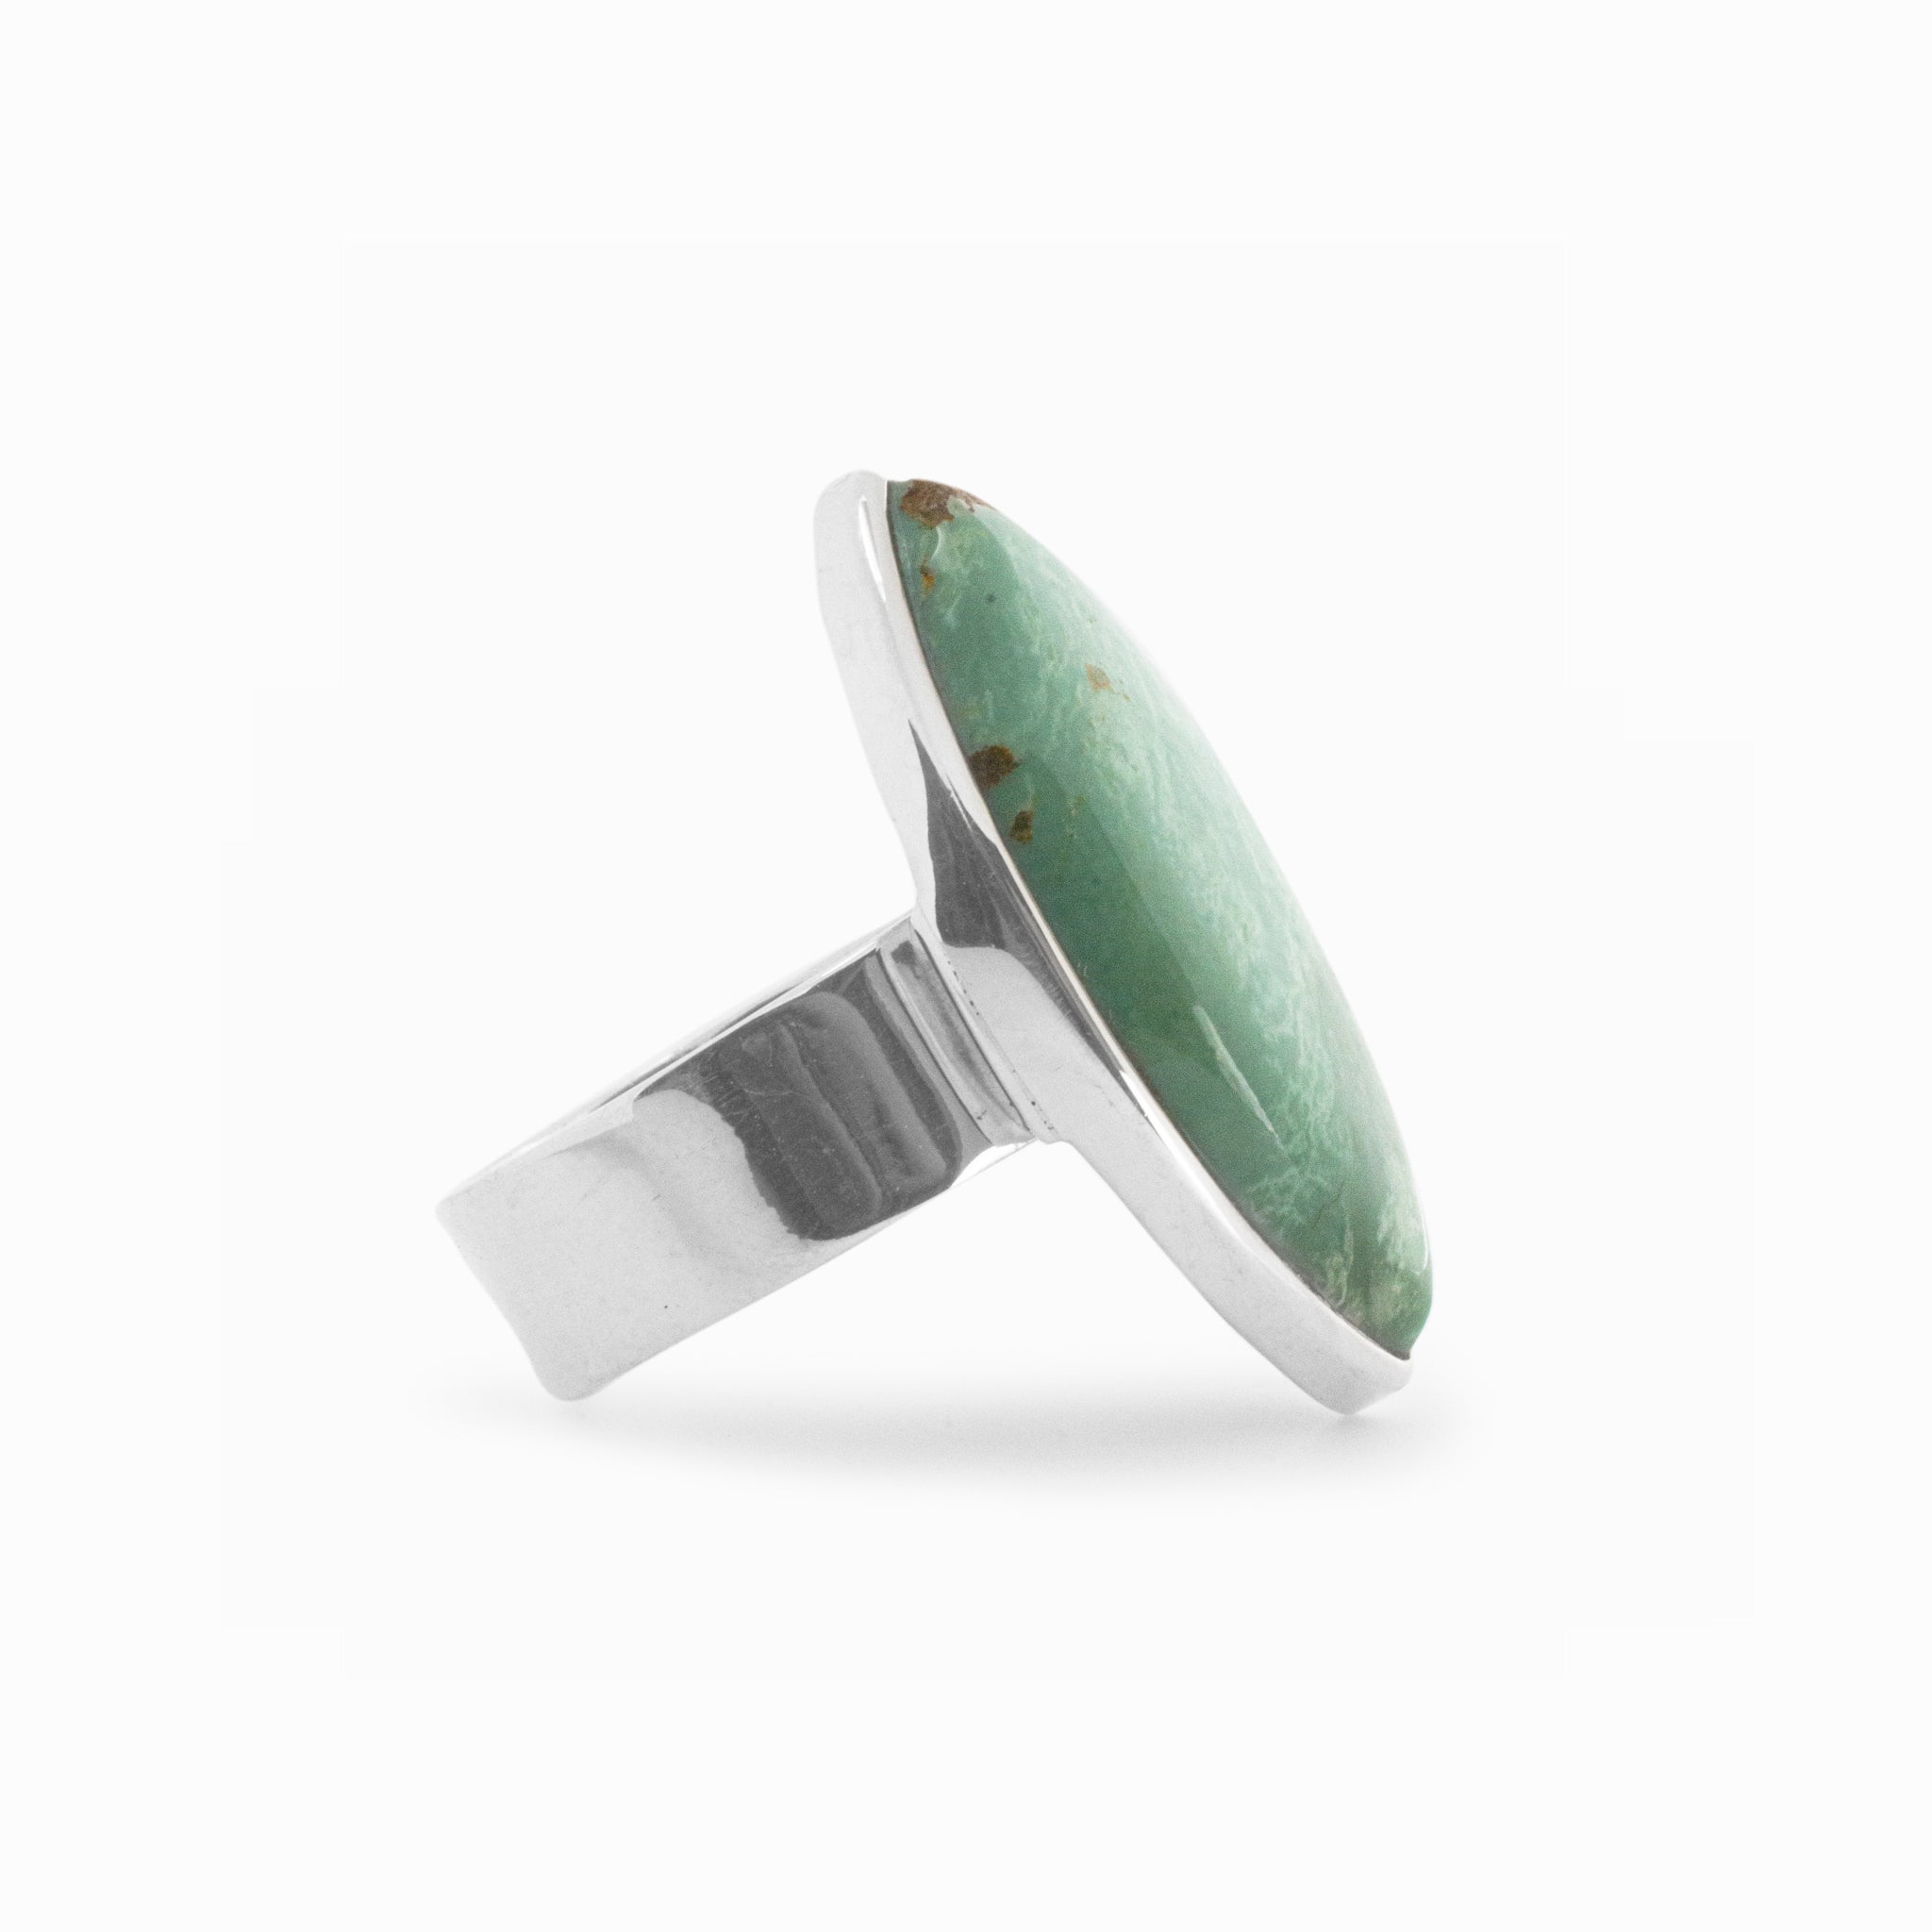 Campo Frio Turquoise Ring